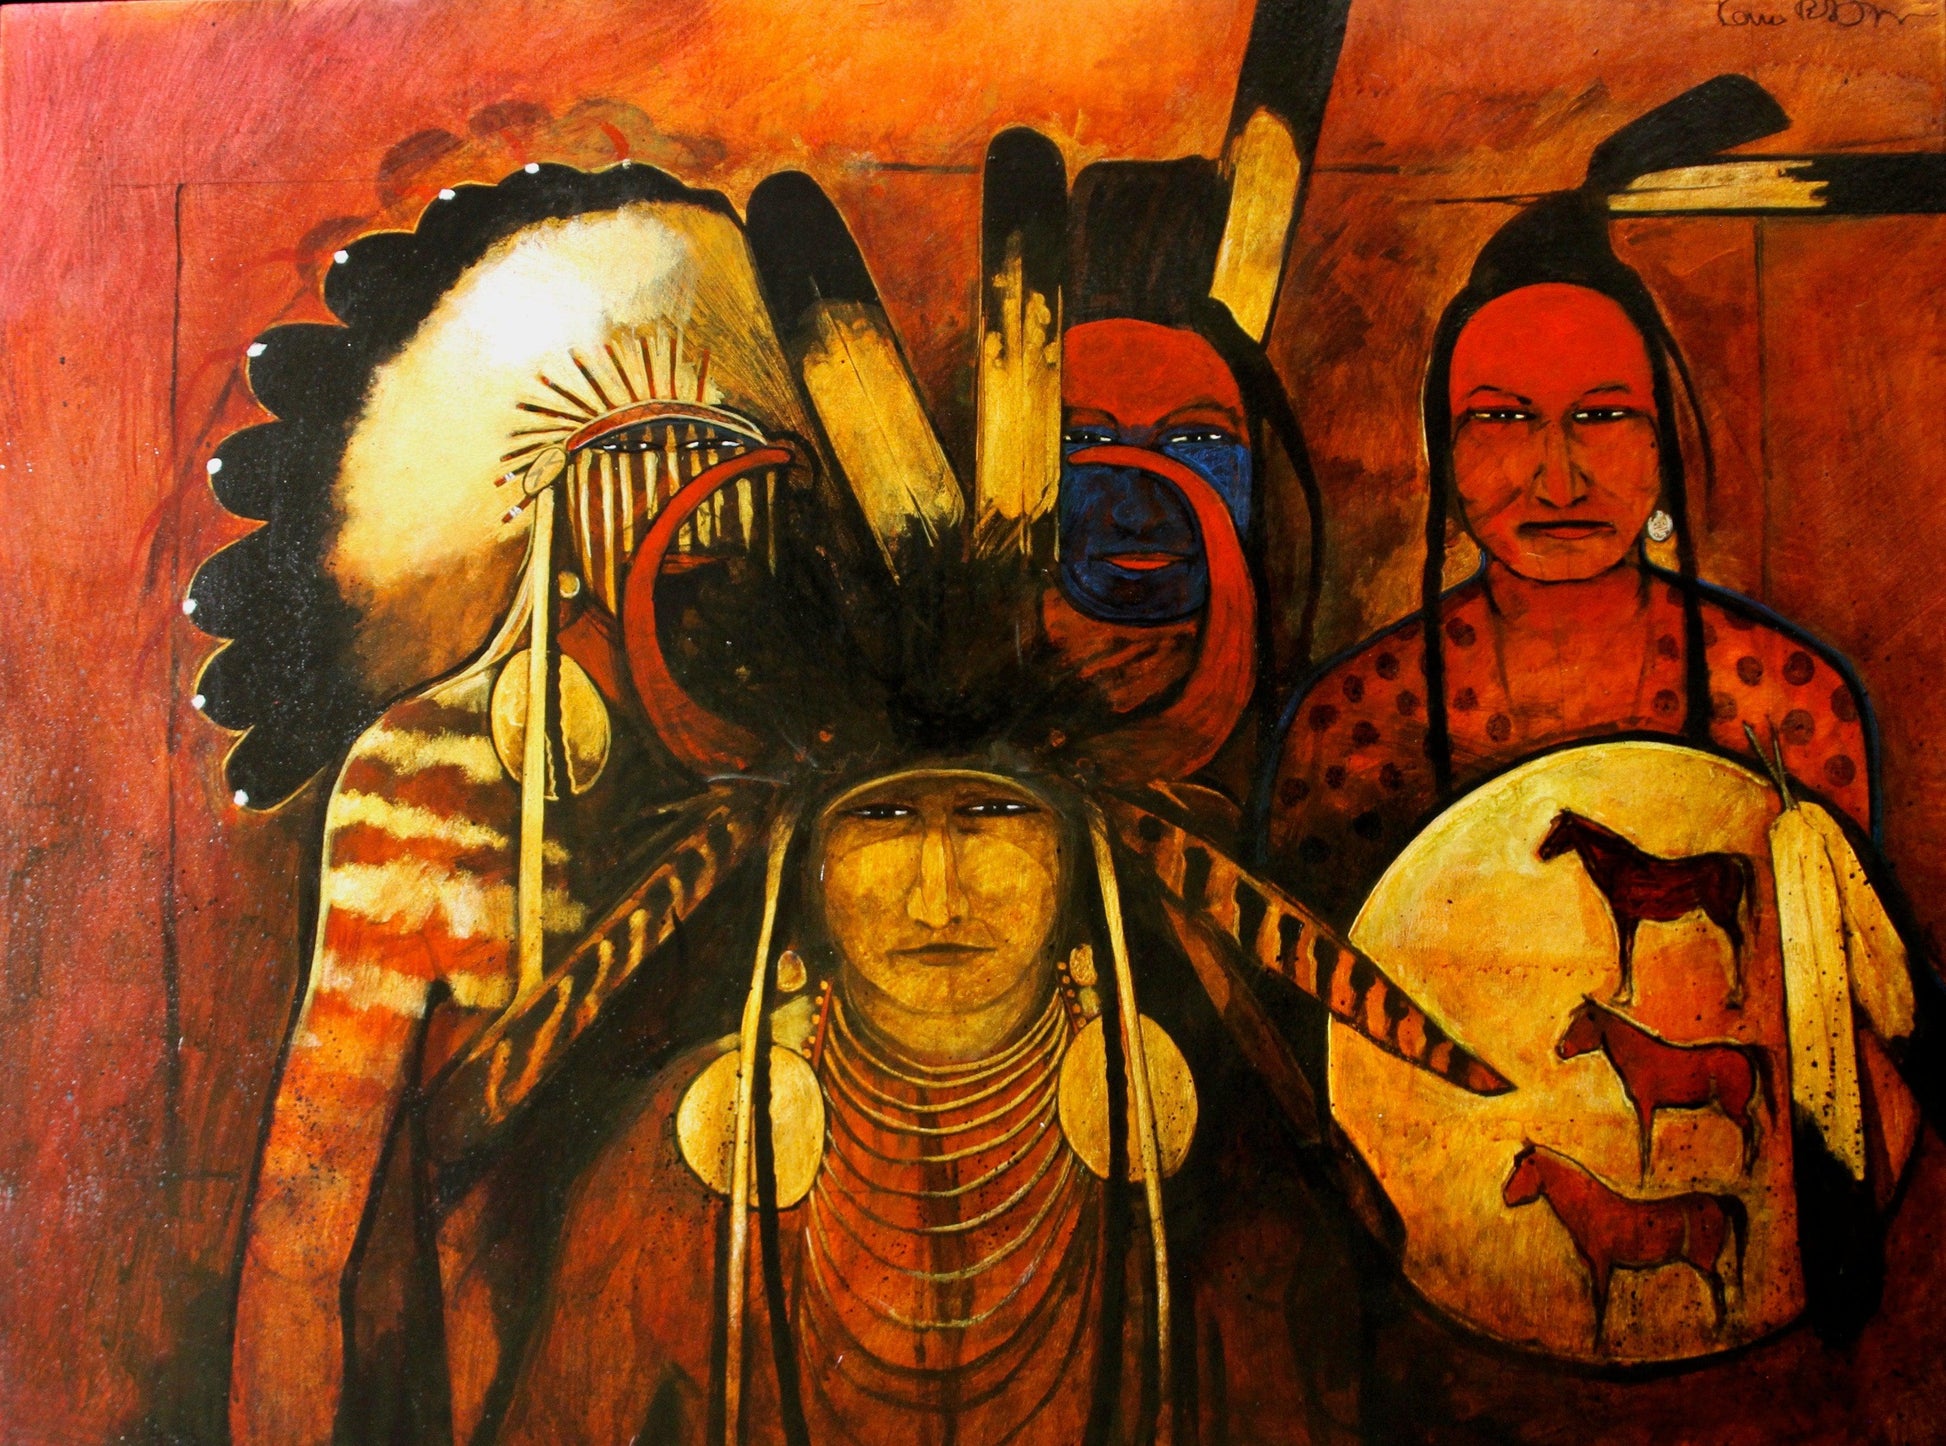 Warrior’s Vision Quest Dream-Painting-Kevin Red Star-Sorrel Sky Gallery